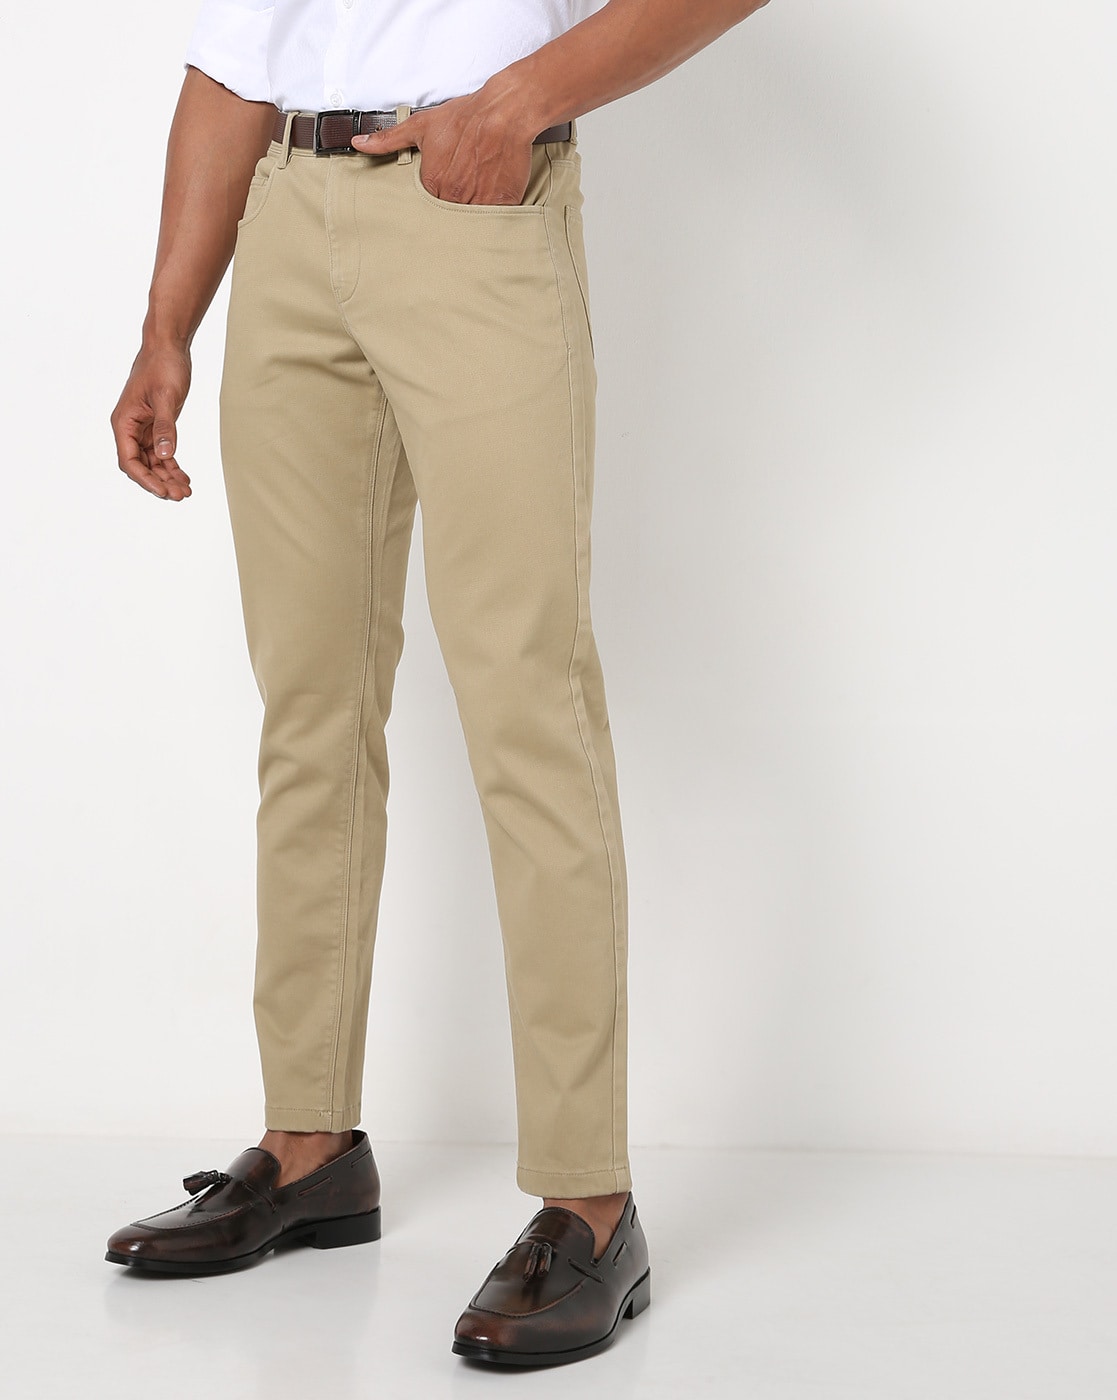 Buy Charcoal Grey Trousers & Pants for Men by NETPLAY Online | Ajio.com